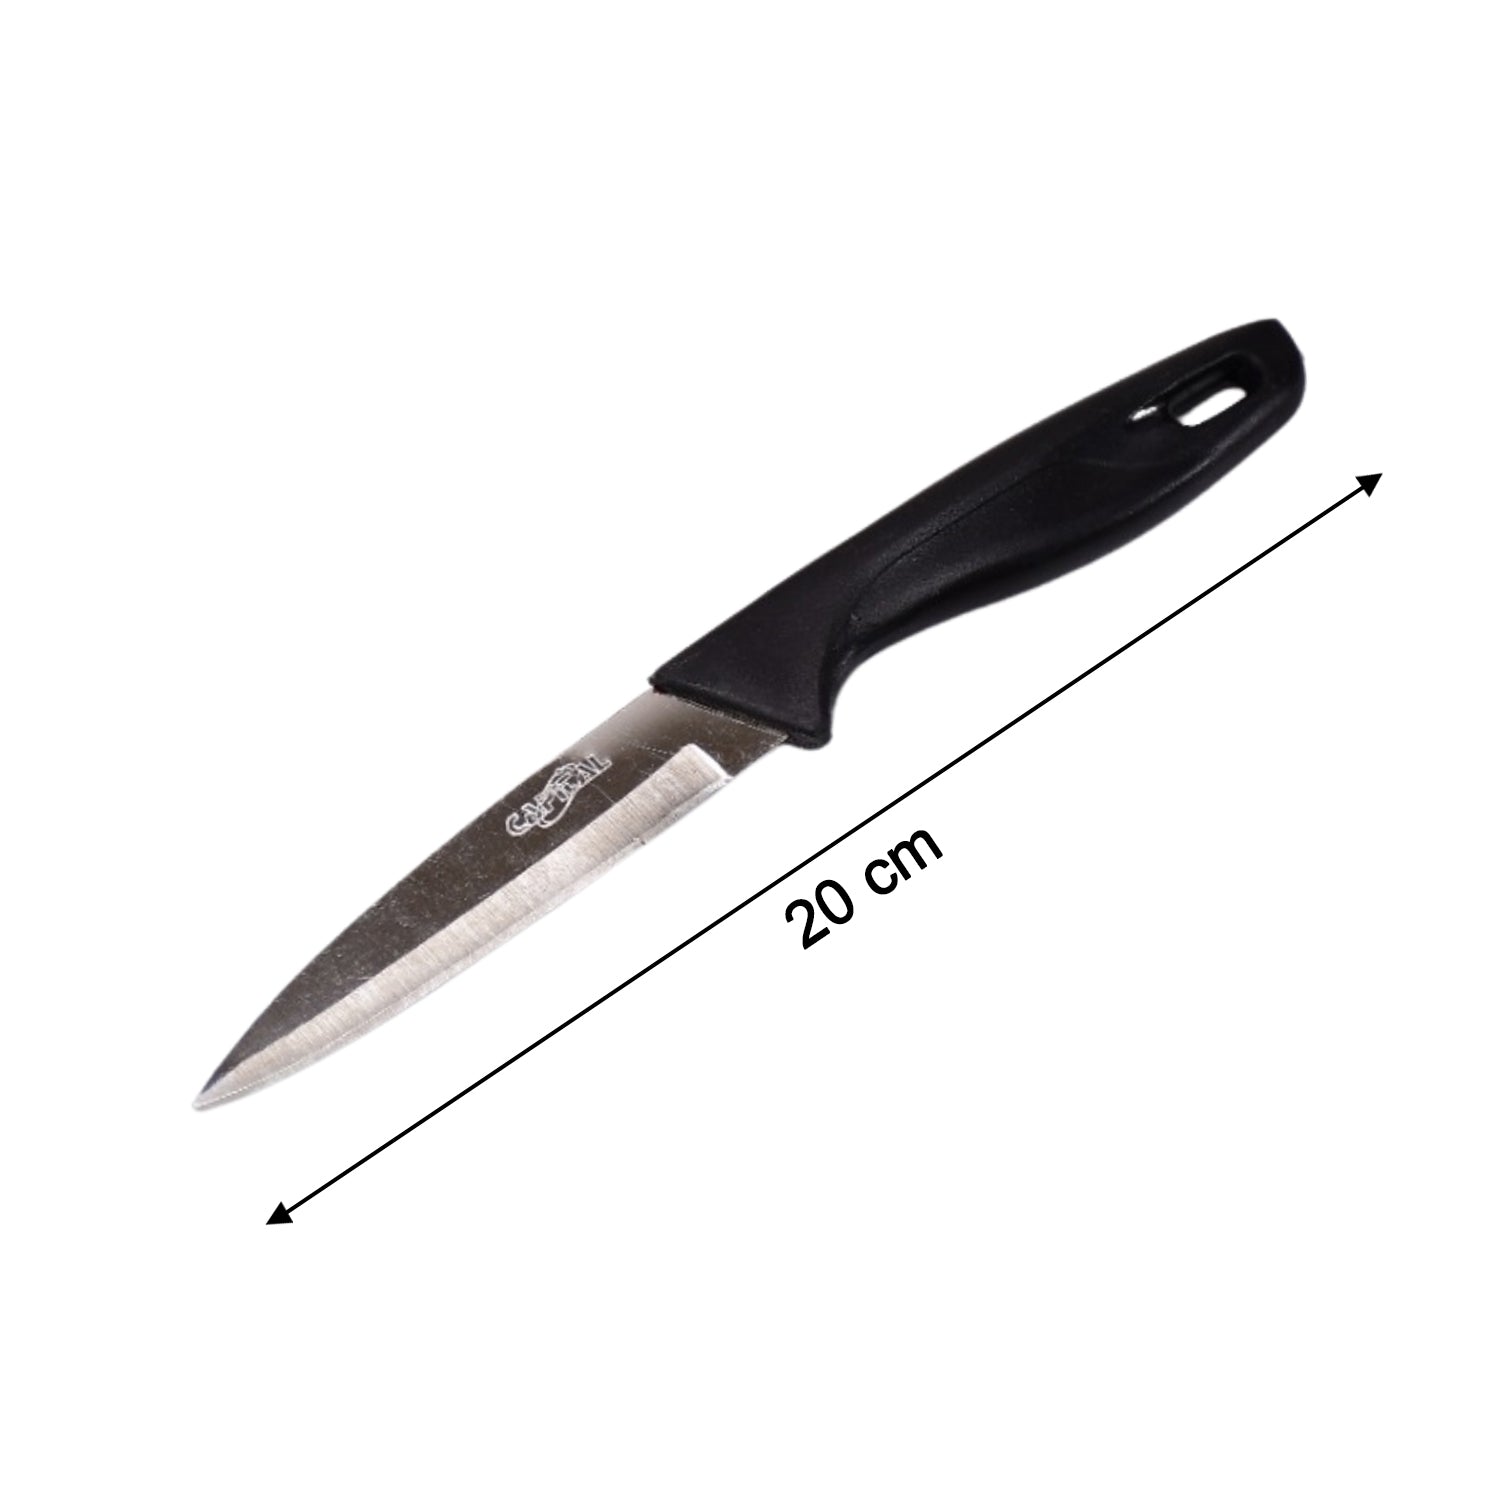 2395 Stainless Steel knife and Kitchen Knife with Black Grip Handle (20 Cm) 